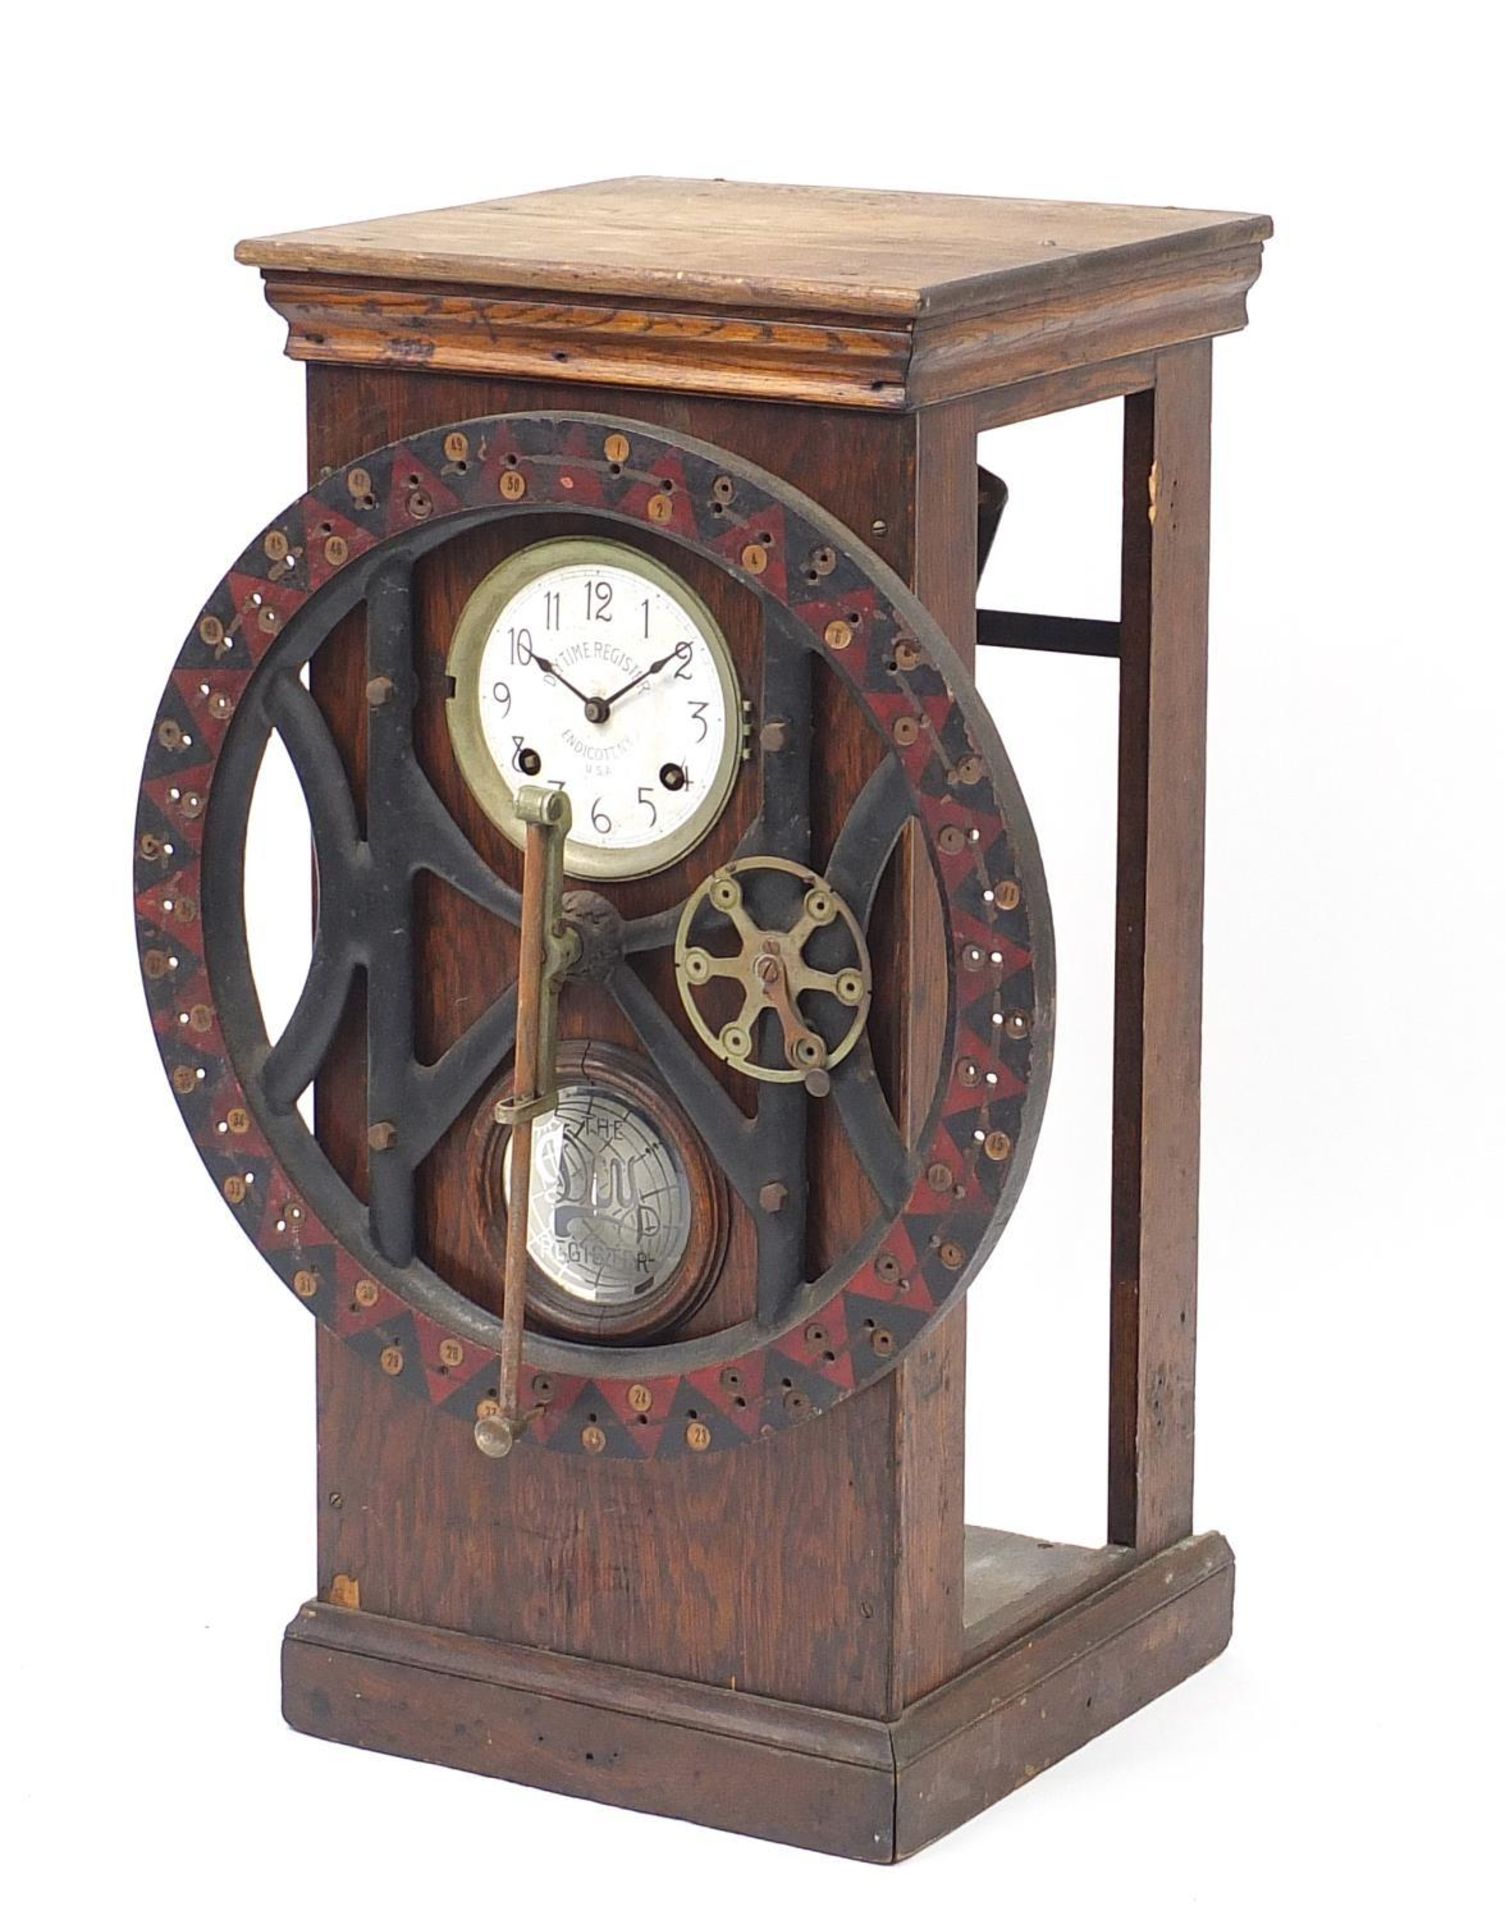 United States of America hardwood daytime register clock with enamel dial and Arabic numerals,